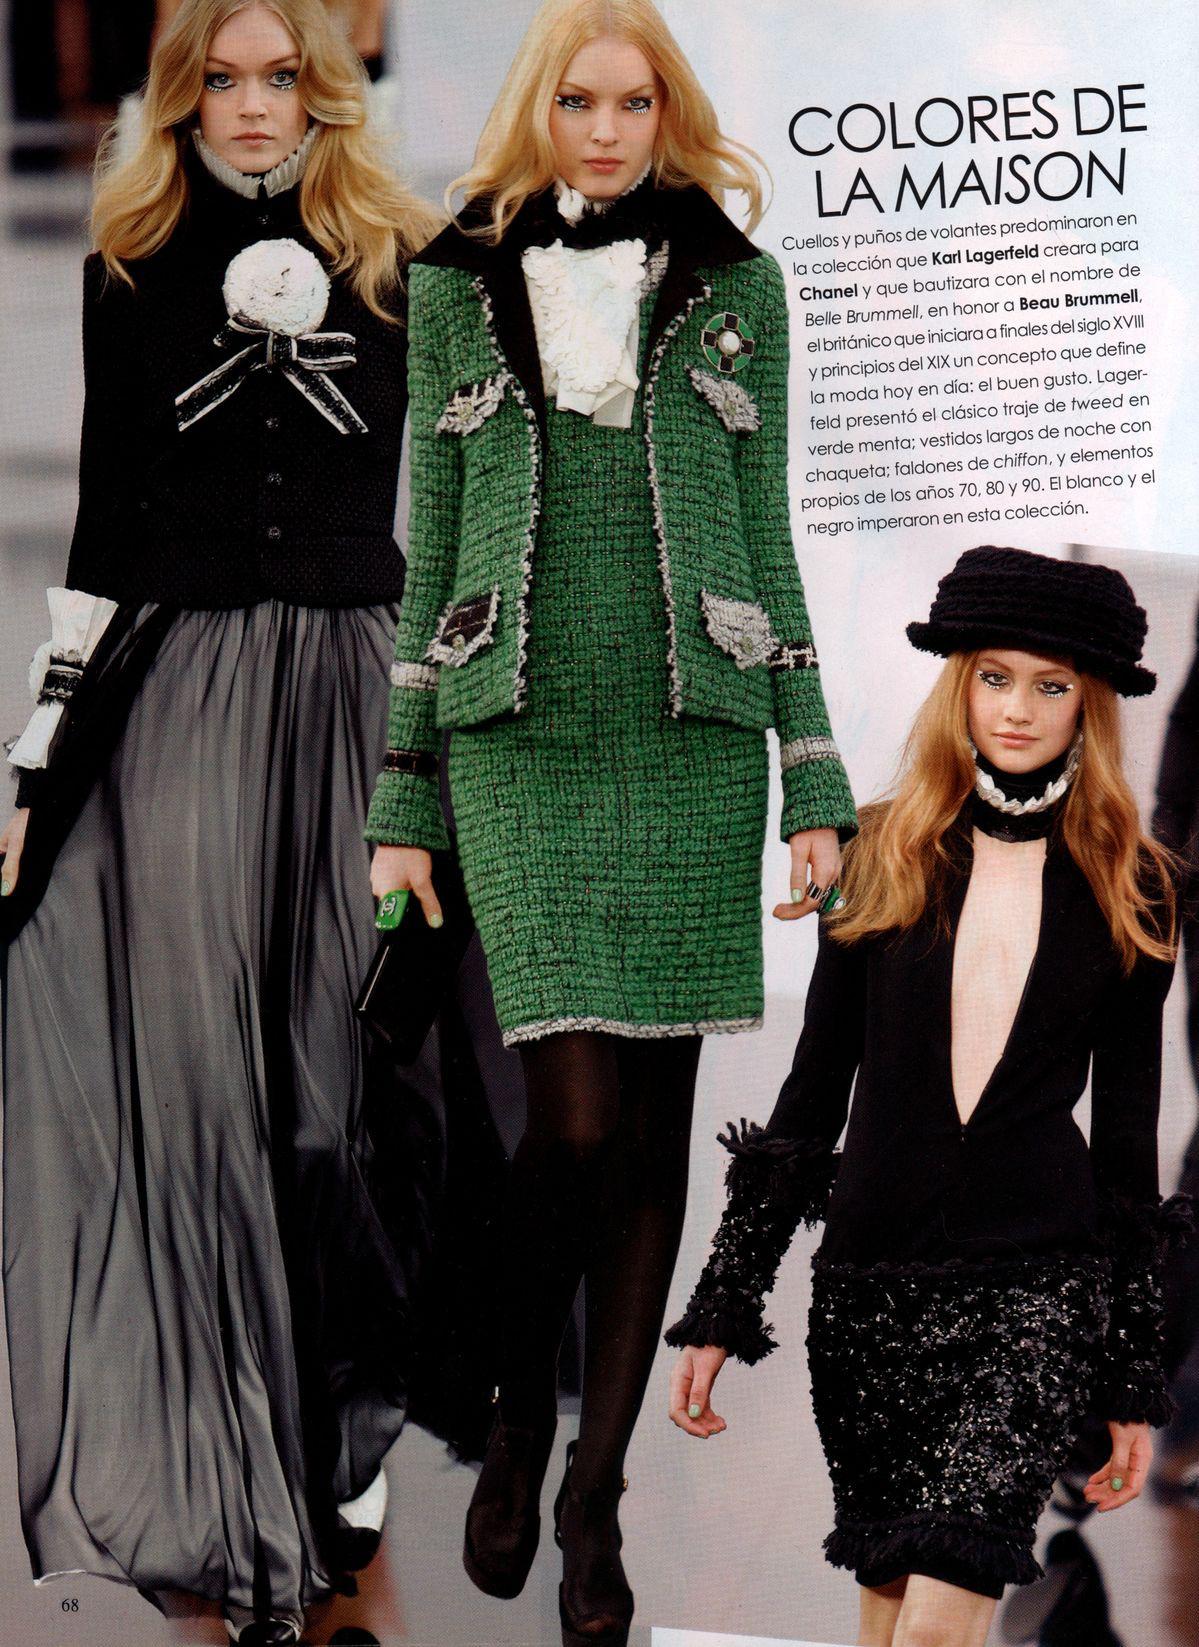 Extremely rare, collectors Chanel emerald green lesage tweed jacket from Runway of 2009 Fall Collection : as seen in many magazines -- most recognisable piece of the Collection! 
- brand's most iconic 4-flap-pockets silhouette
- gorgeous lesage